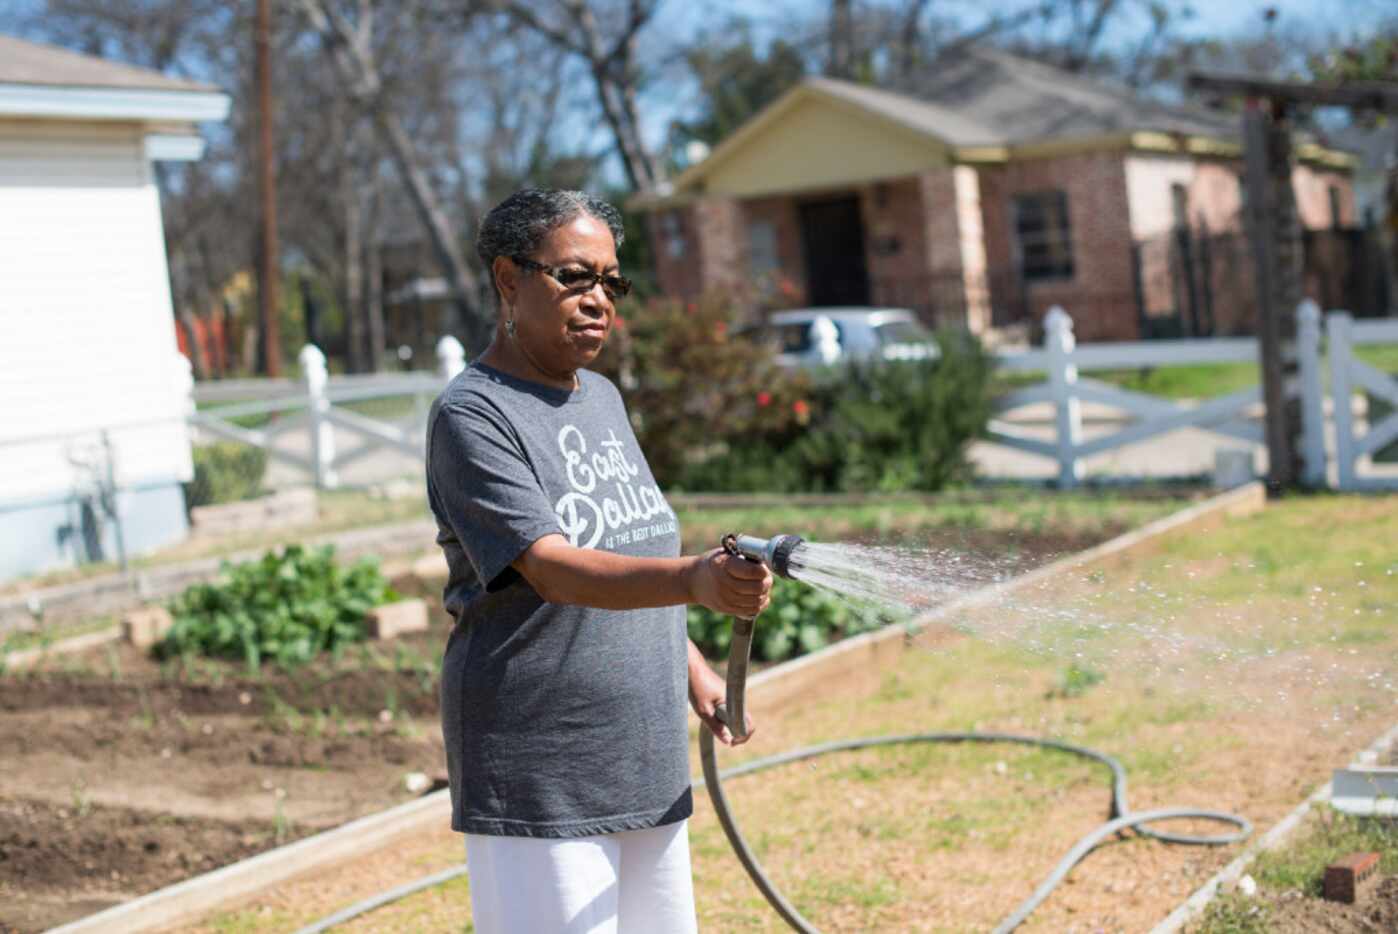 Anna Hill tends to the community garden next to her home in the Dallas neighborhood of...